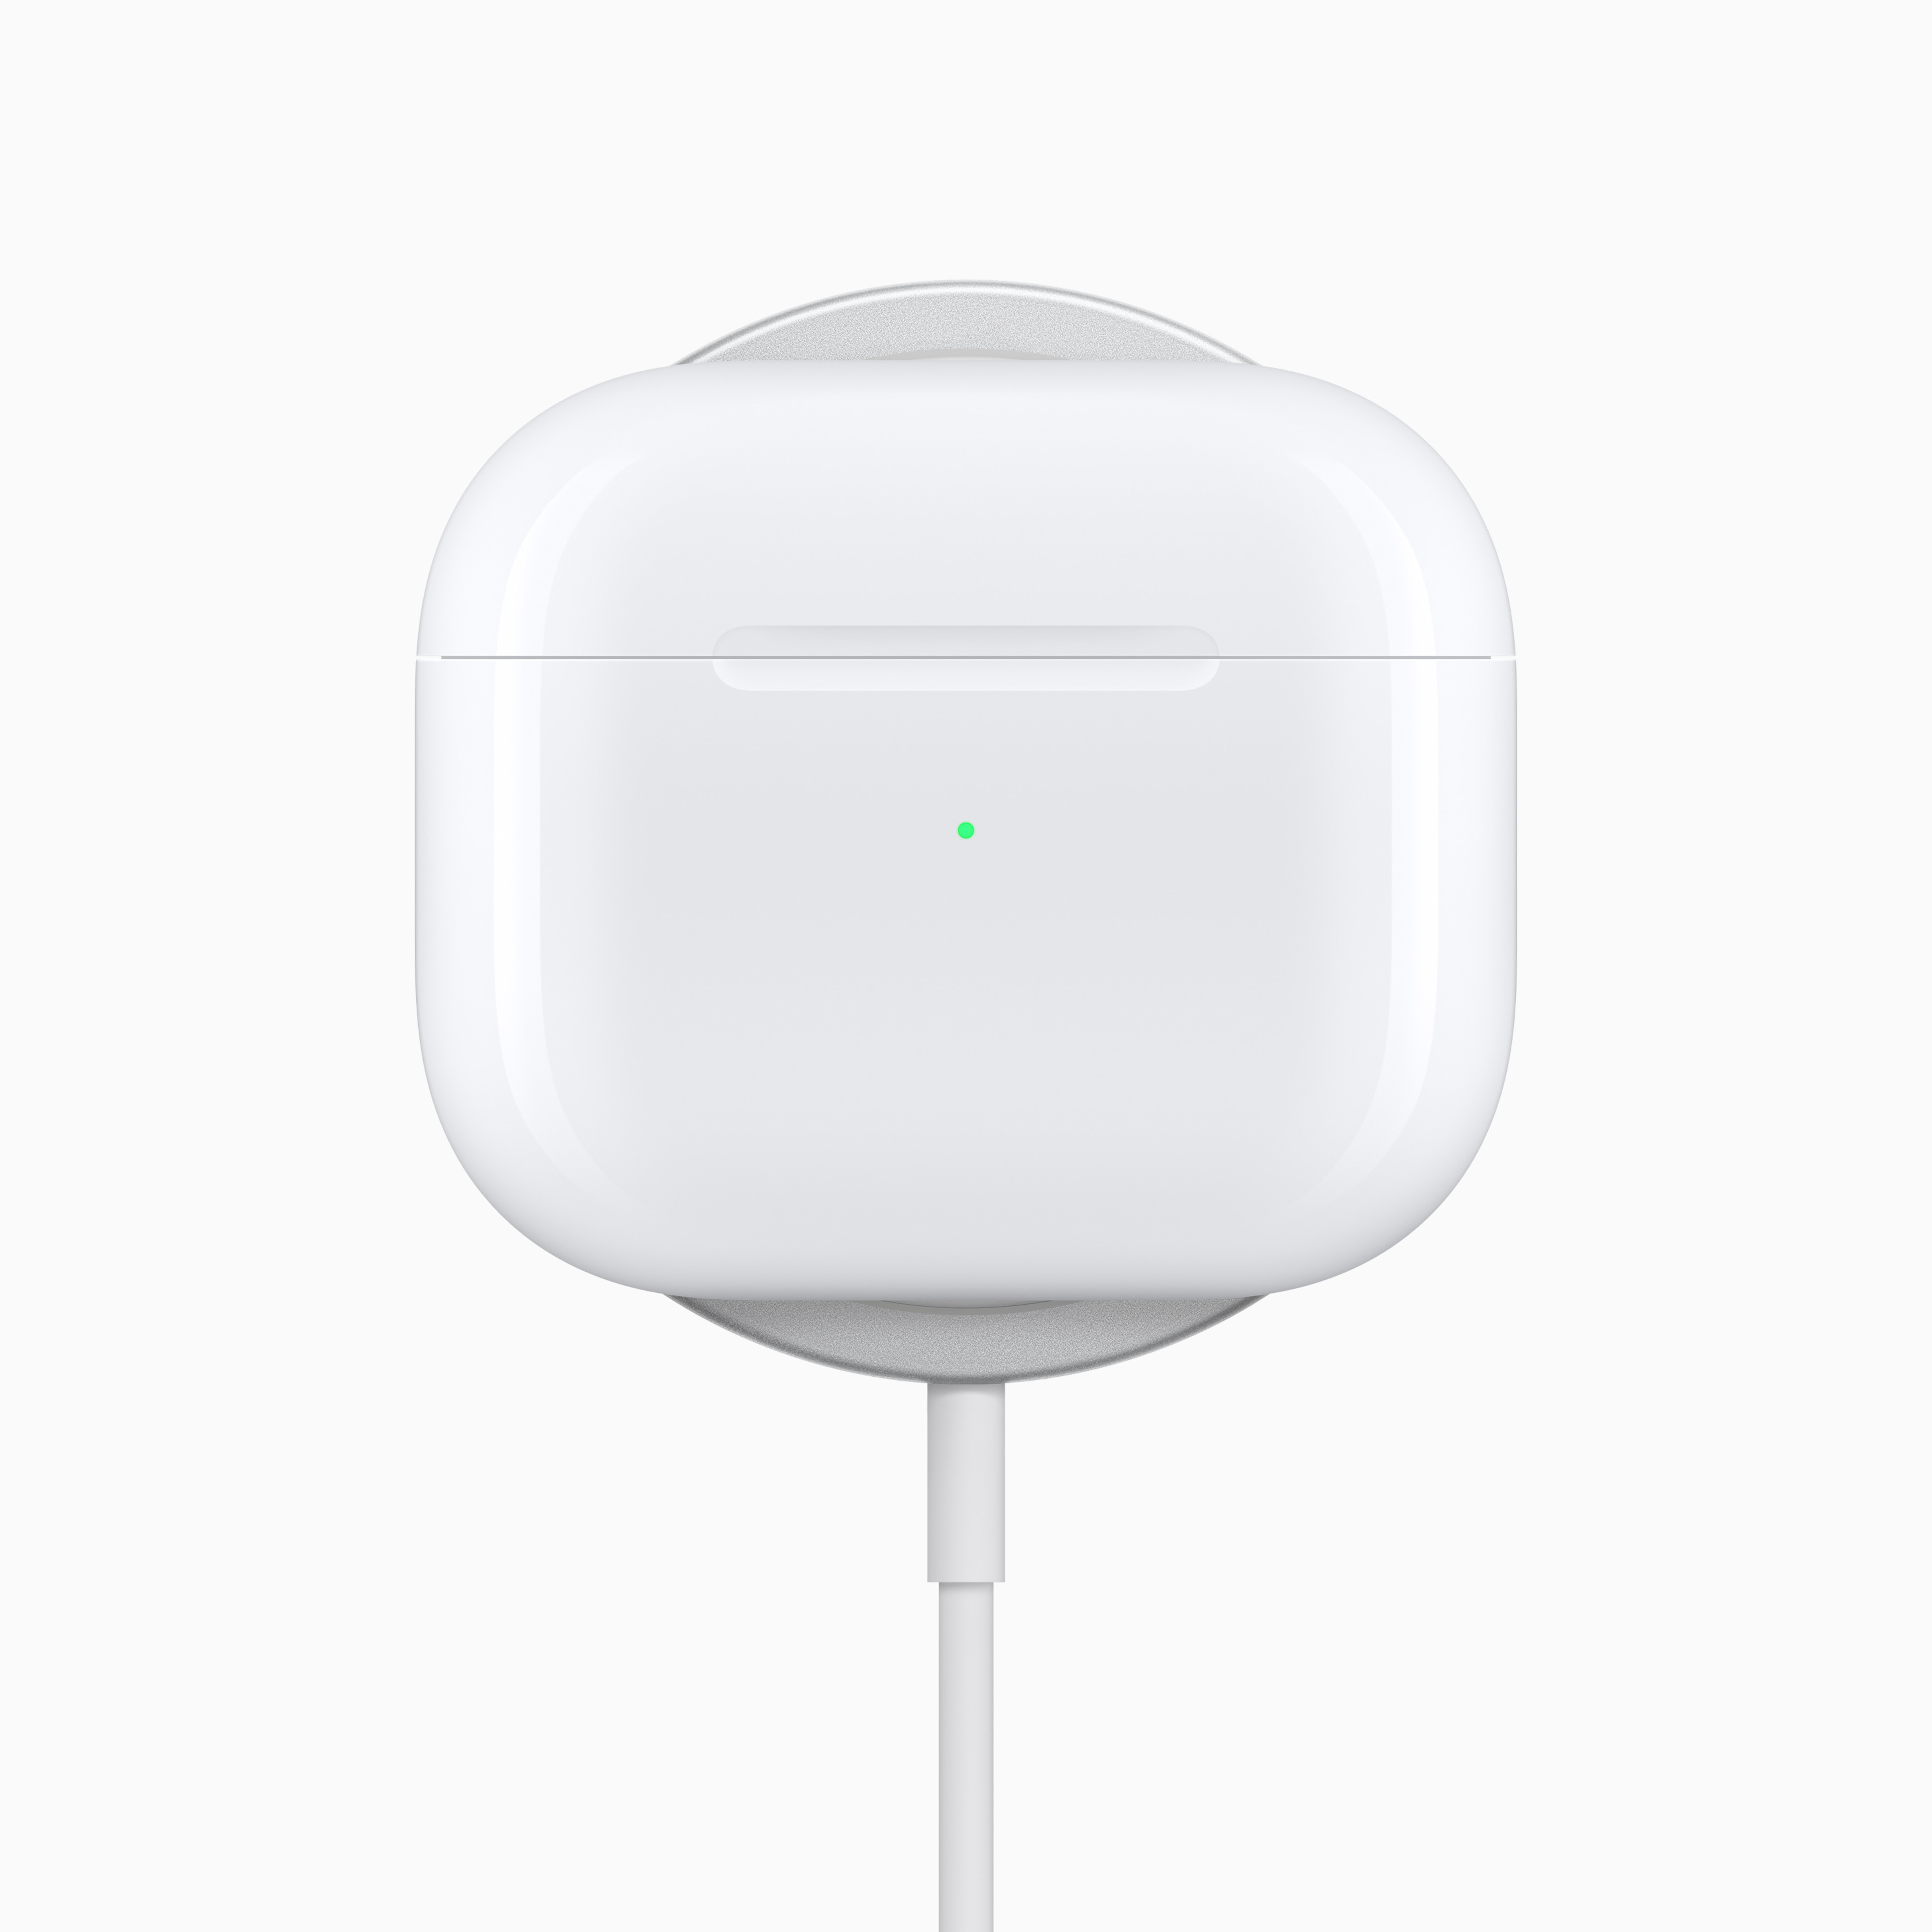 Buy AirPods (2nd generation) - Apple (IE)